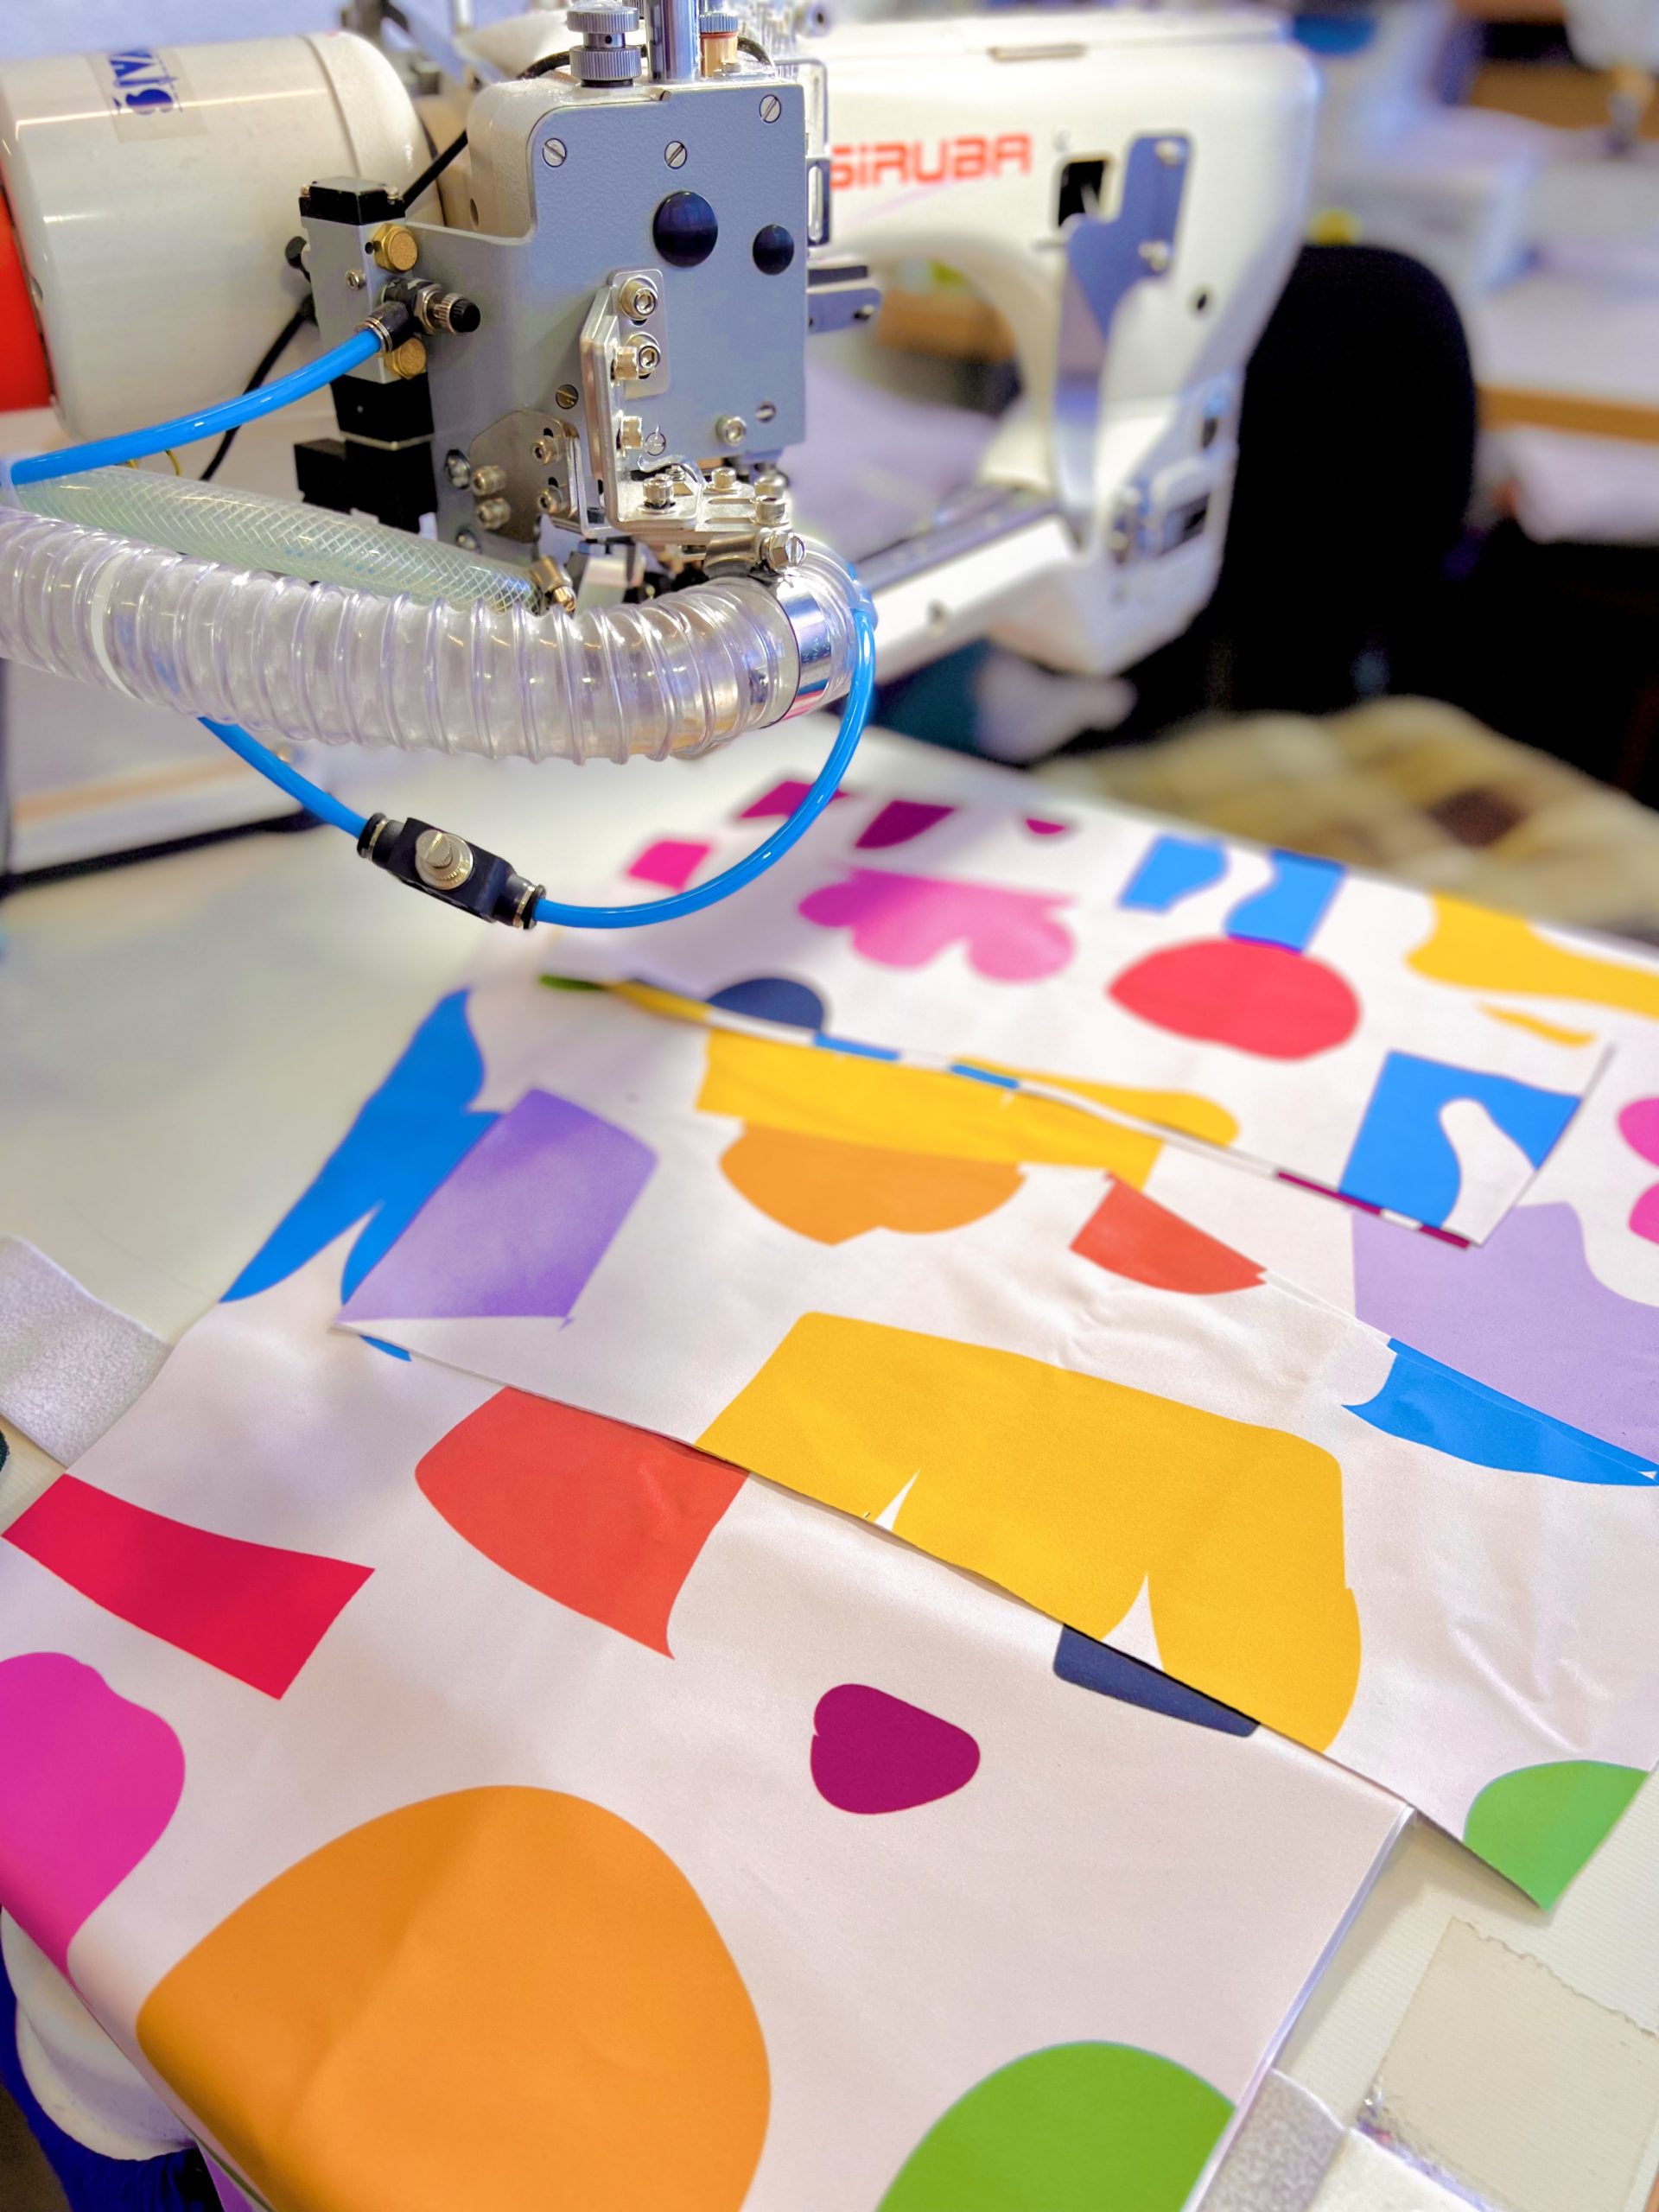 sewing machine and colorful fabrics